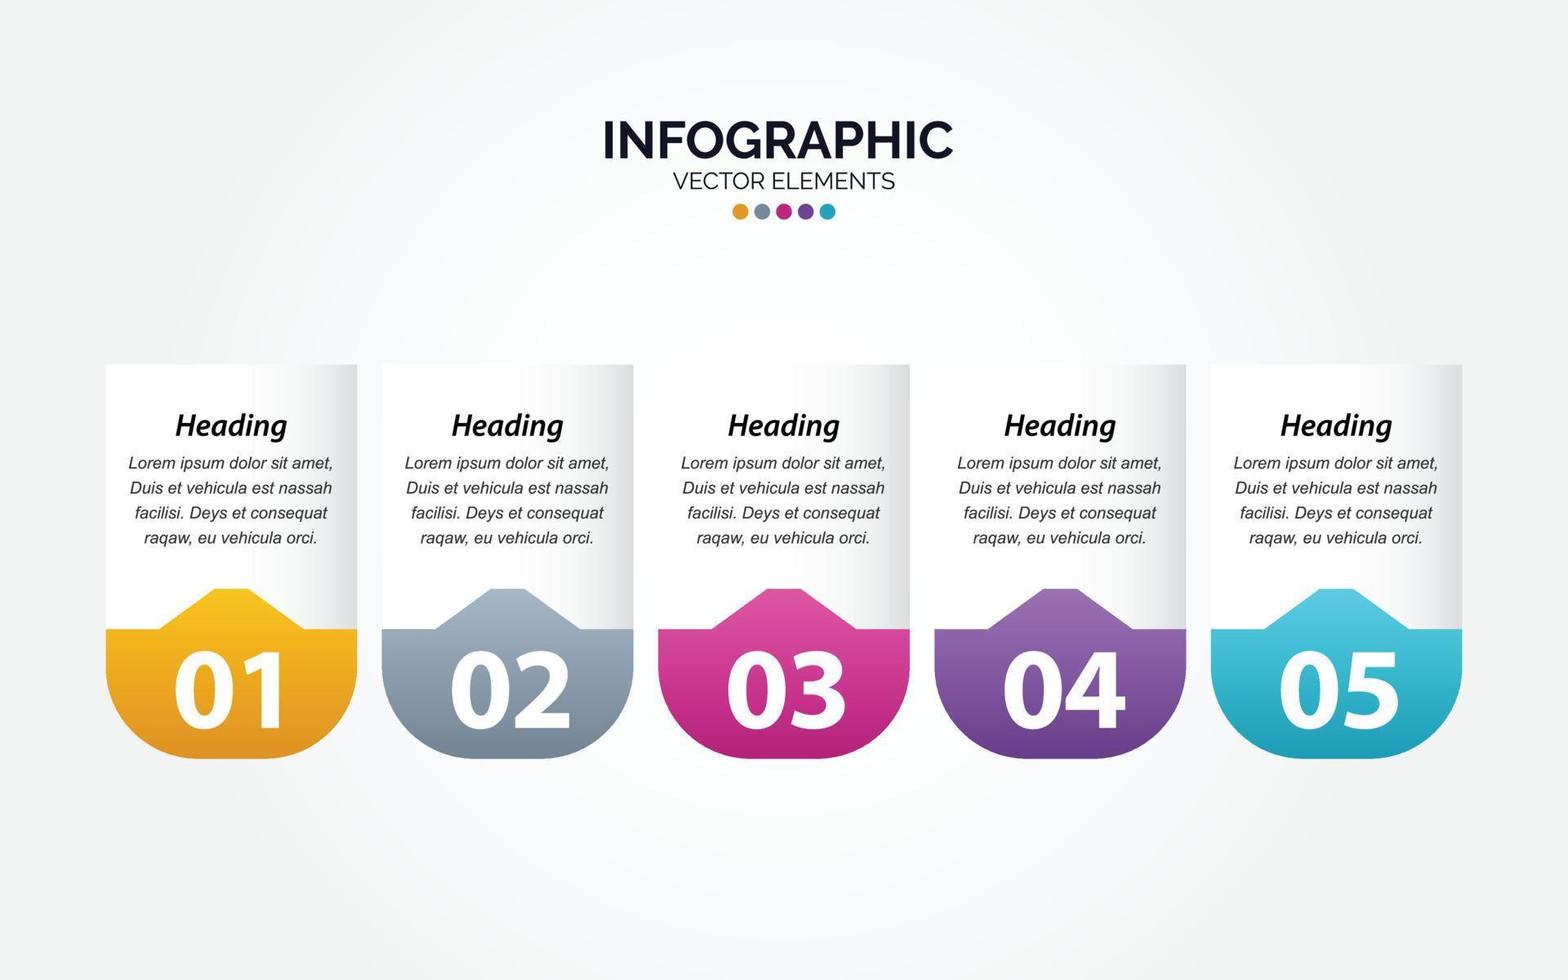 Timeline 5 options Horizontal Infographic for presentations workflow process diagram flow chart report vector